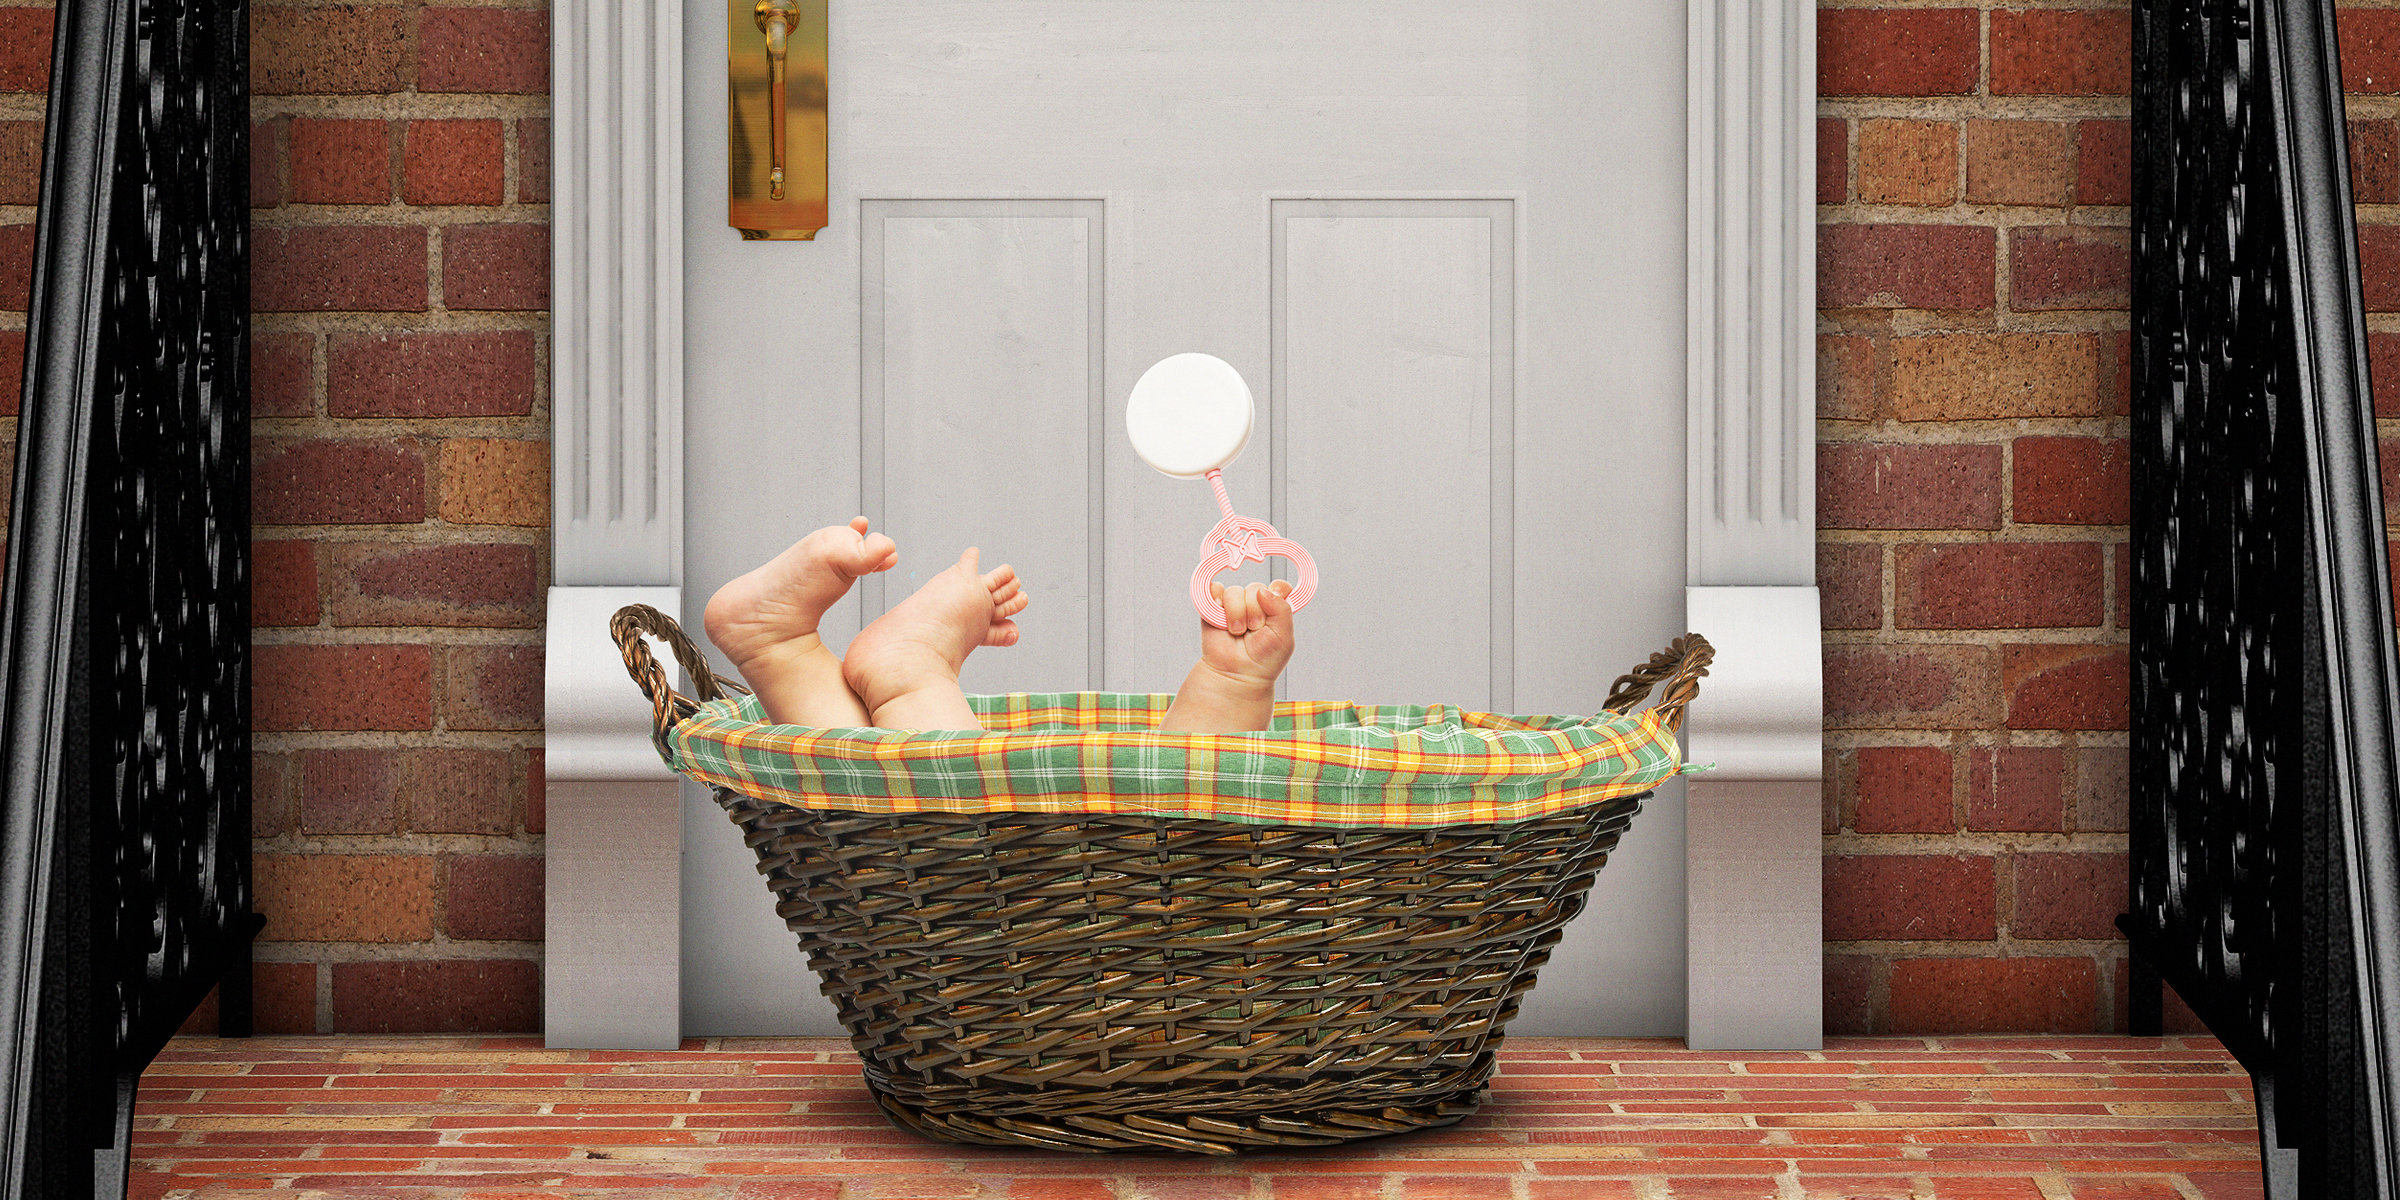 A baby in a basket on a doorstep | Source: Shutterstock